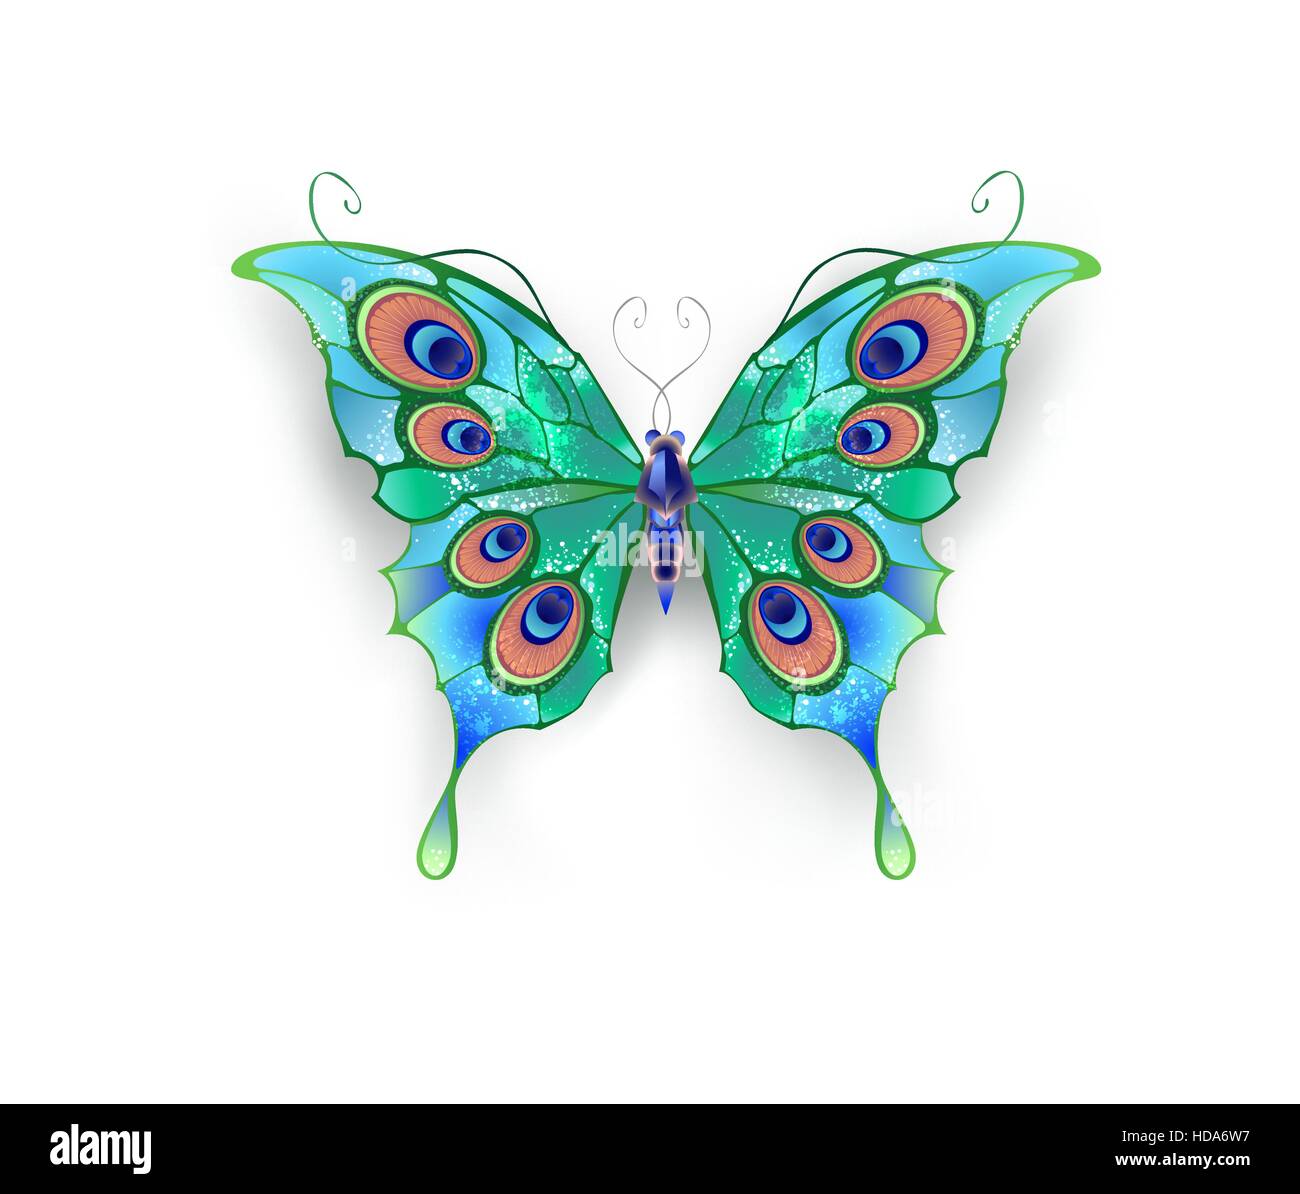 butterfly with green wings, decorated with blue circles on a White background. Stock Vector